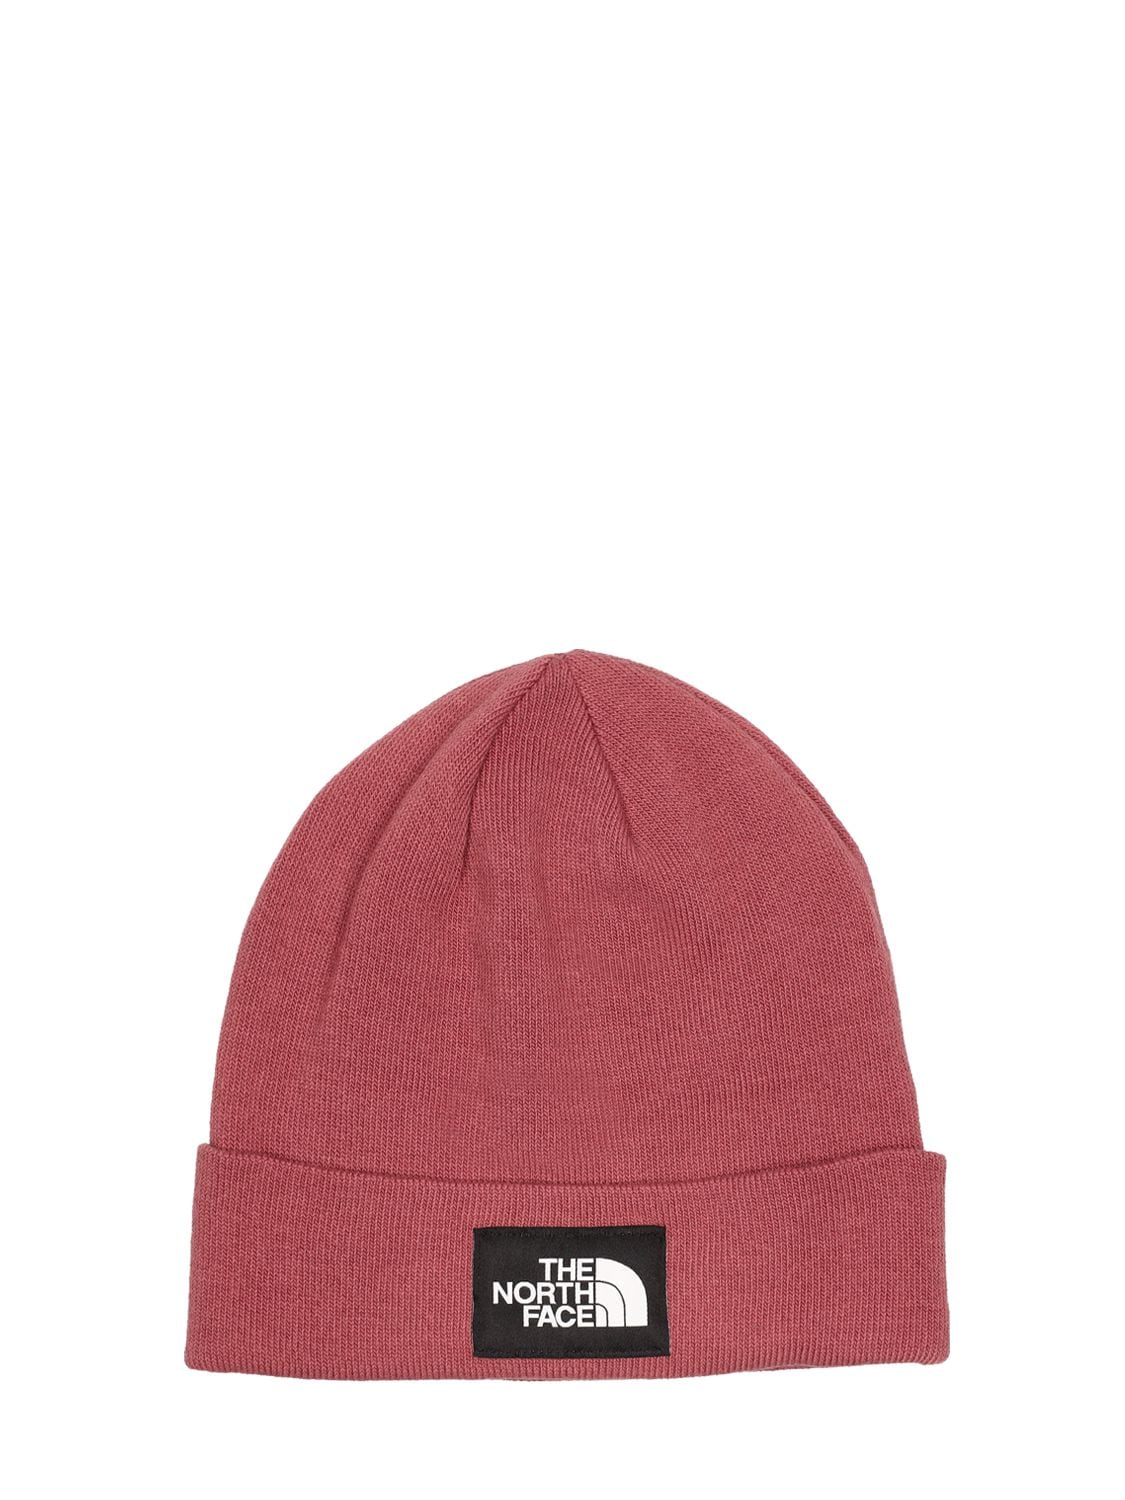 The North Face Dock Worker Beanie In Wild Ginger